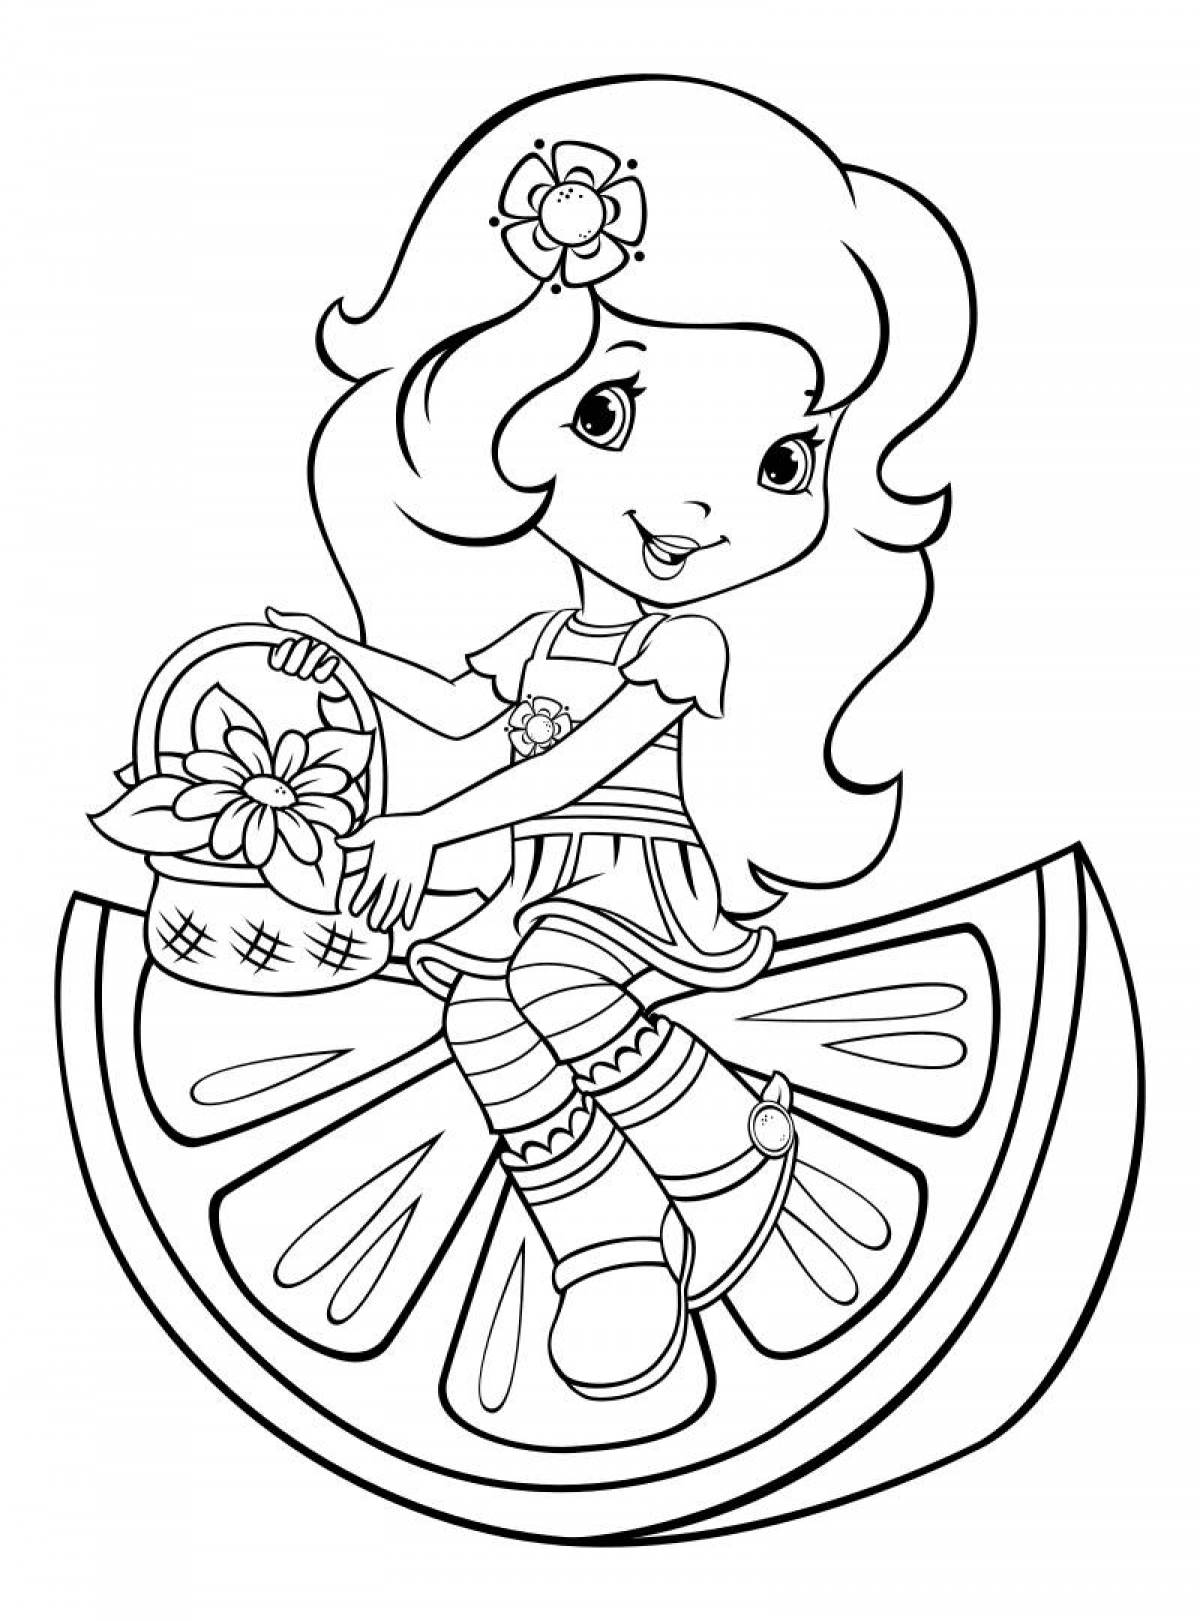 Charming princess coloring book for kids 5-6 years old